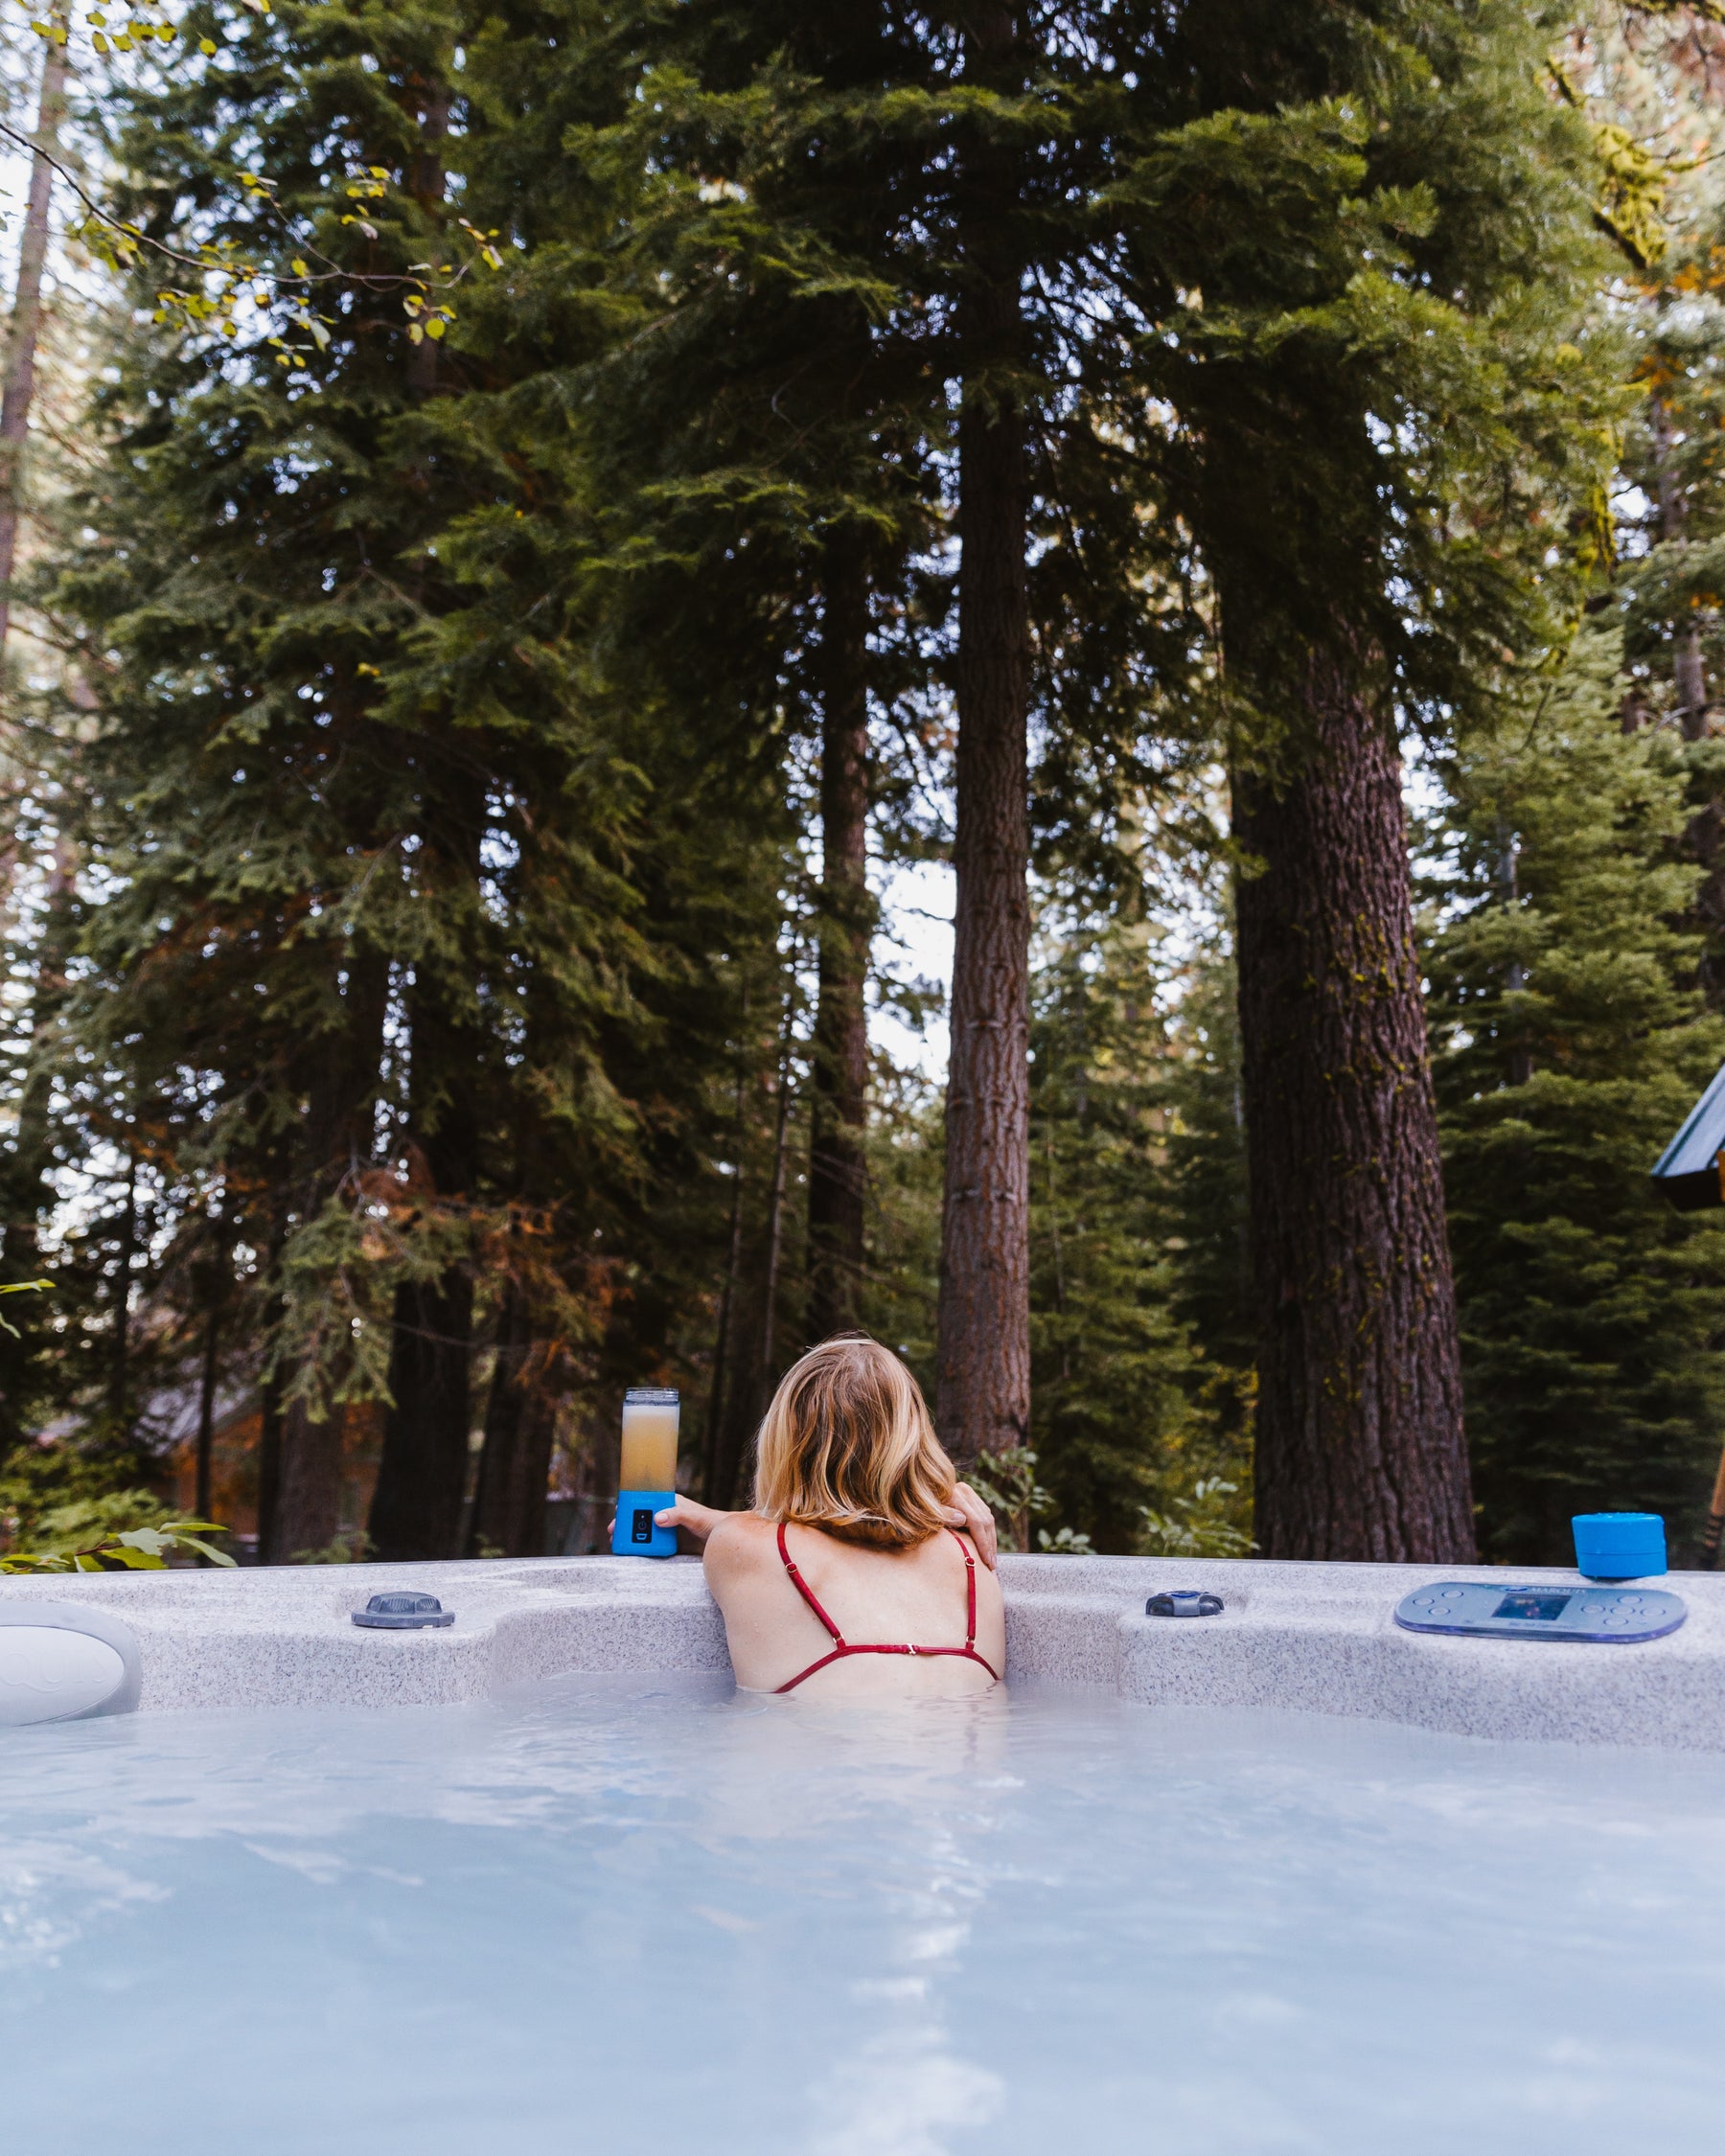 Do You Use A Hot Tub Before Or After The Sauna?